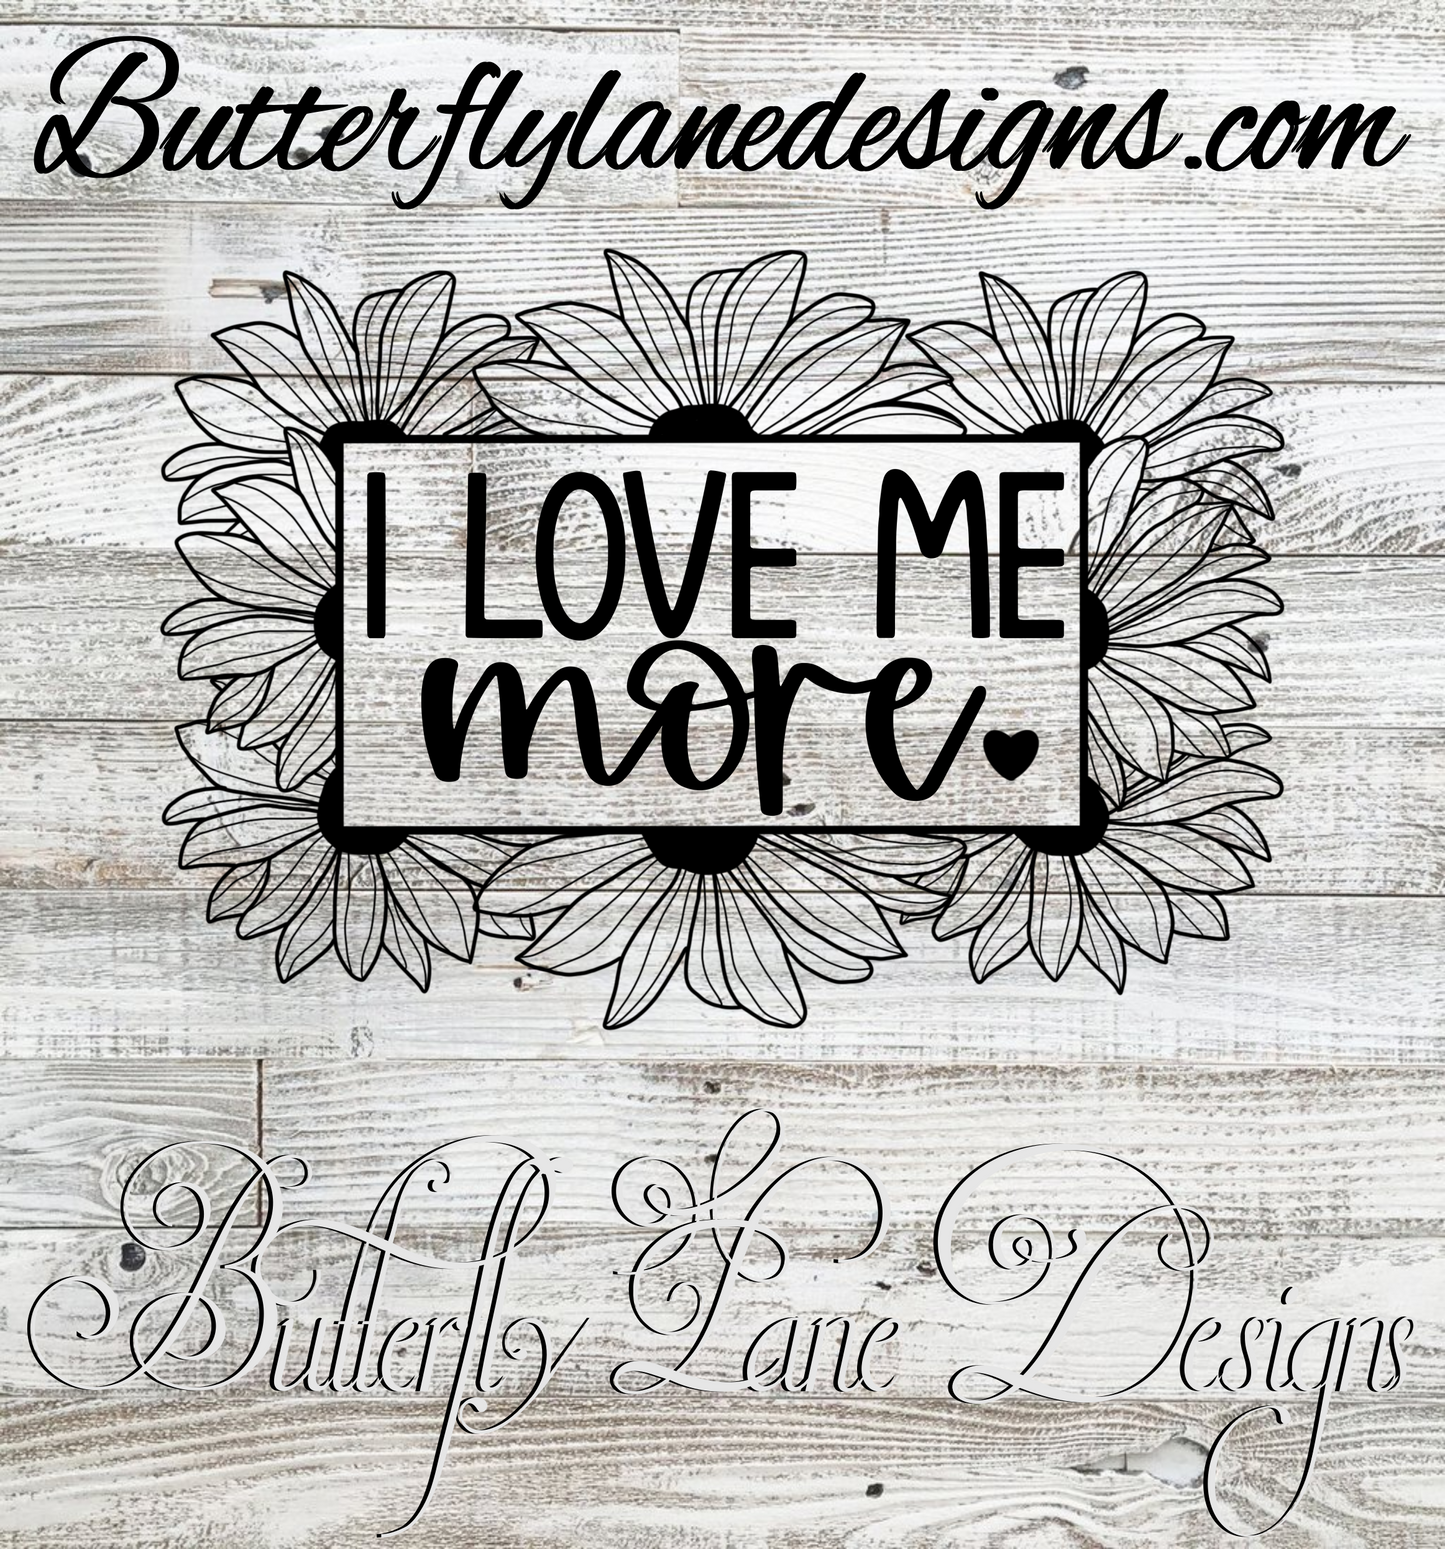 I Love me more :: Clear Decal or VC Decal